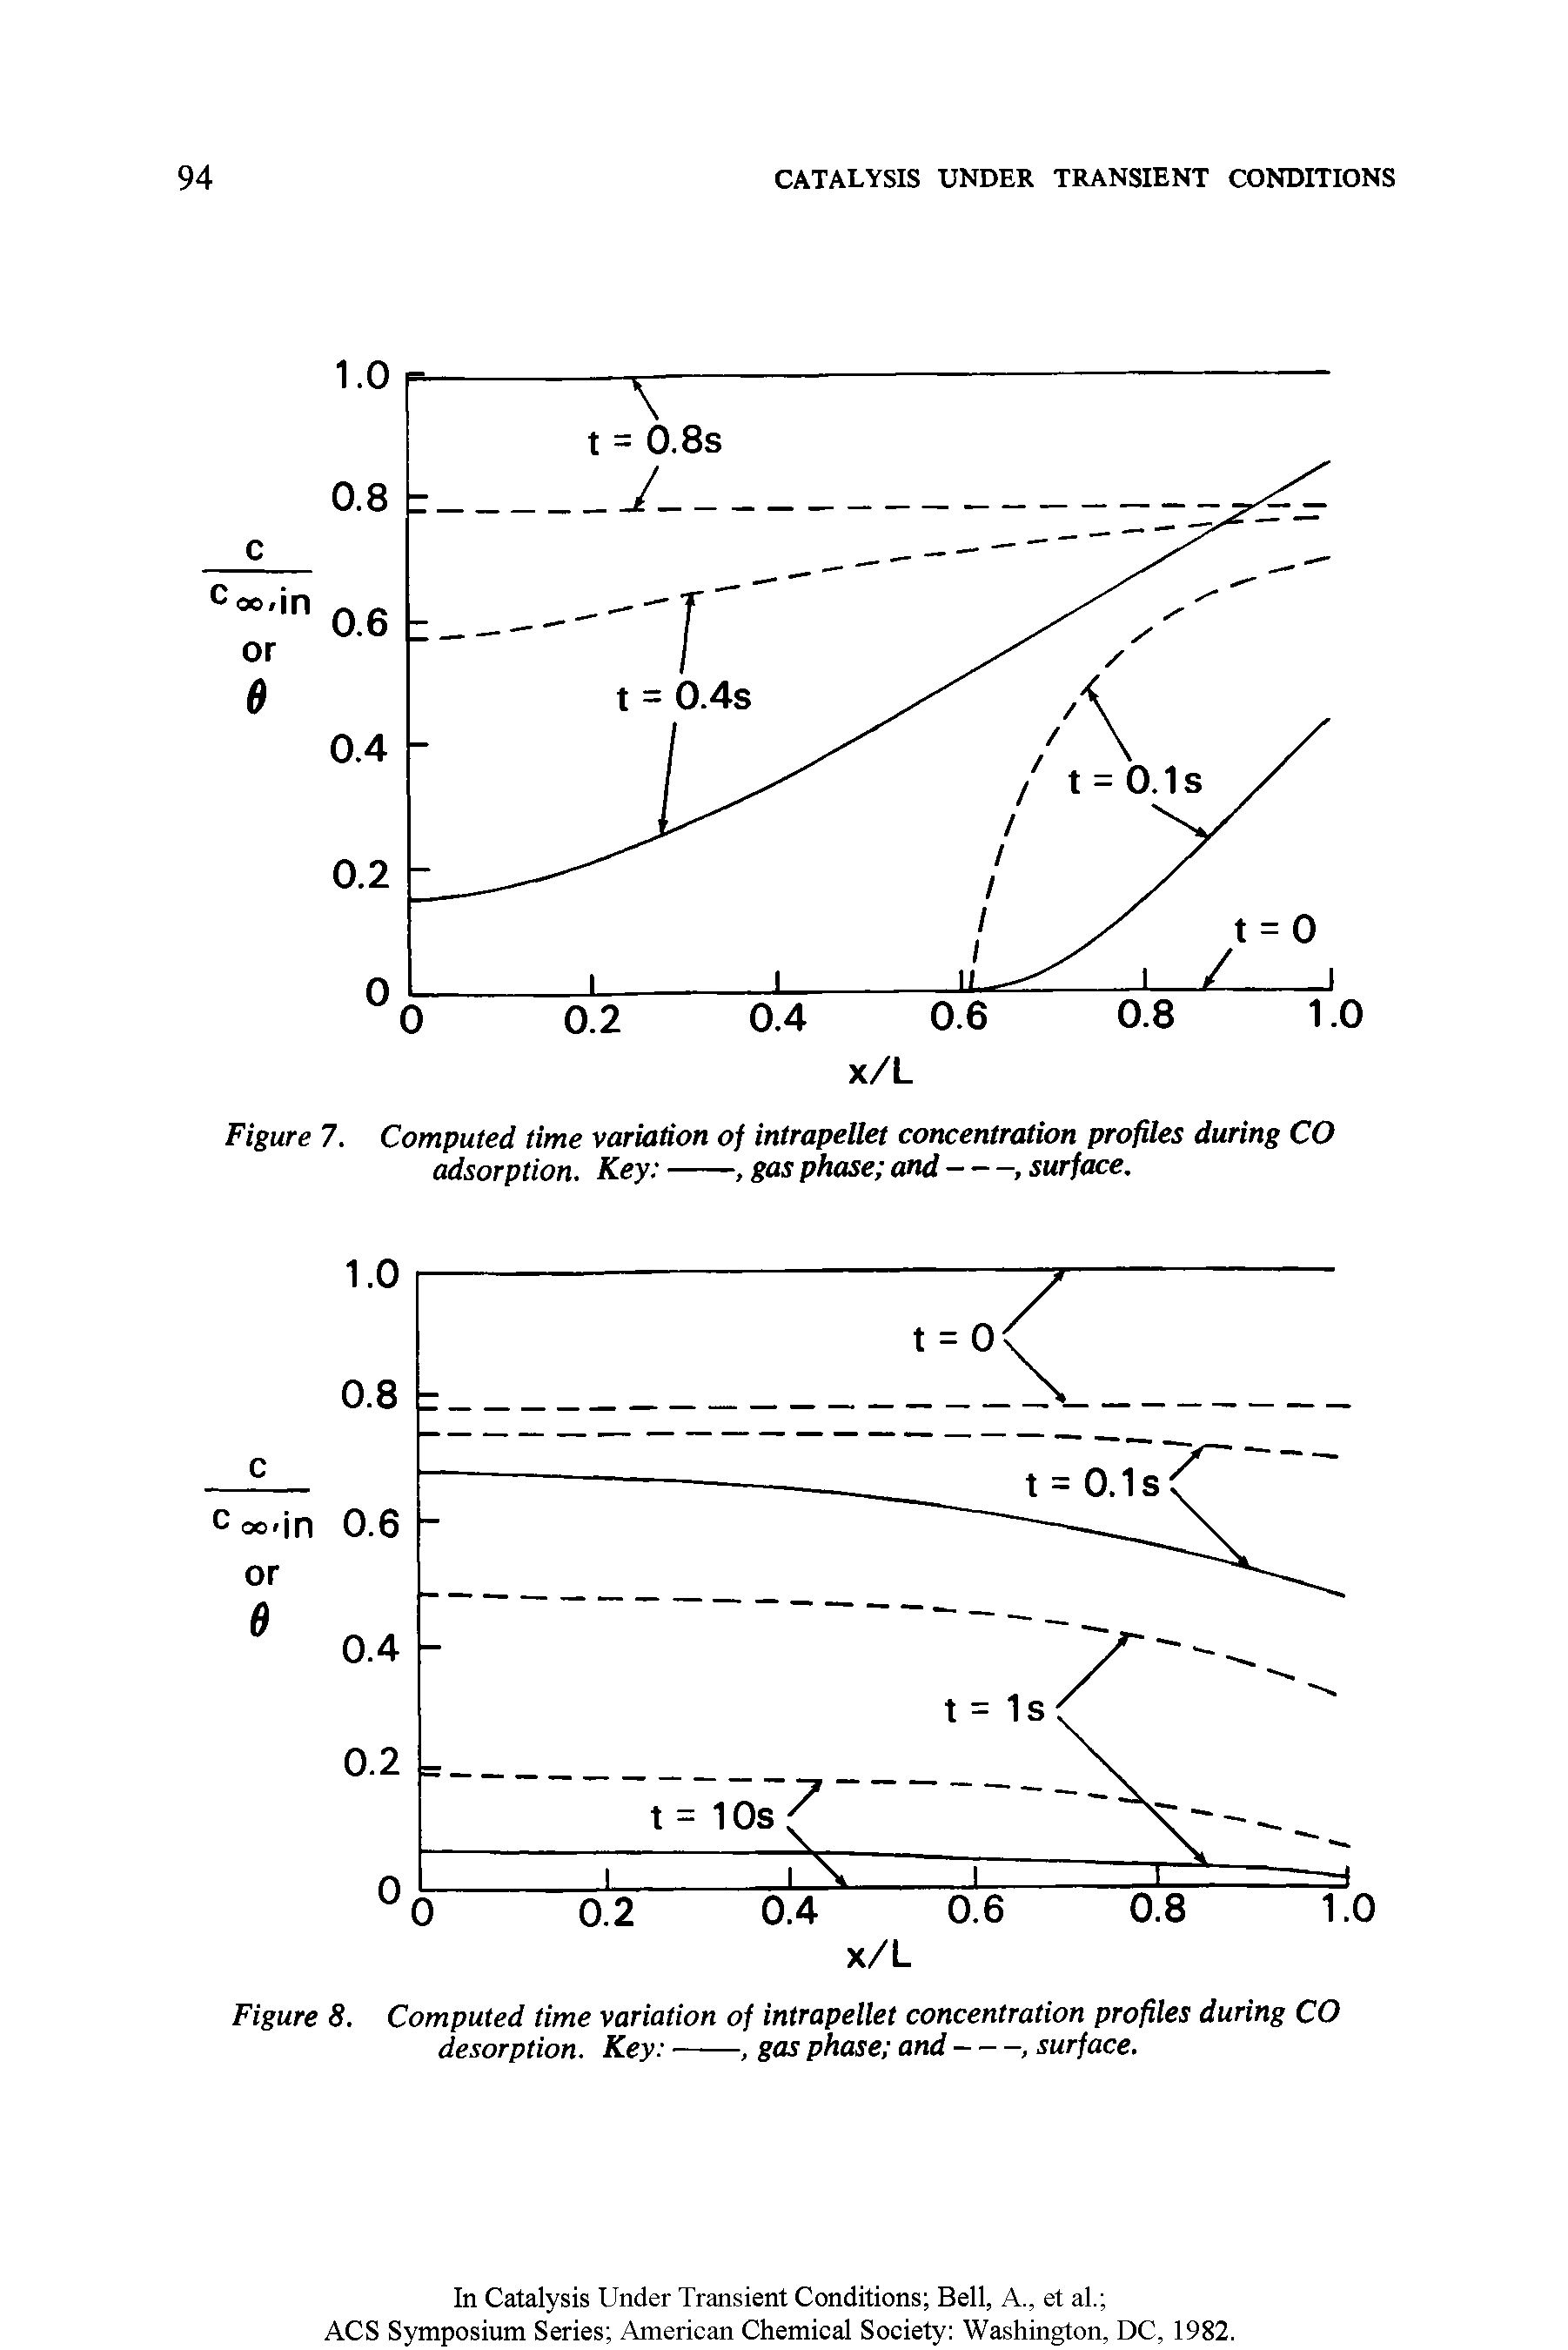 Figure 7. Computed time variation of intrapellet concentration profiles during CO adsorption. Key ---------------------, gas phase and----> surface.